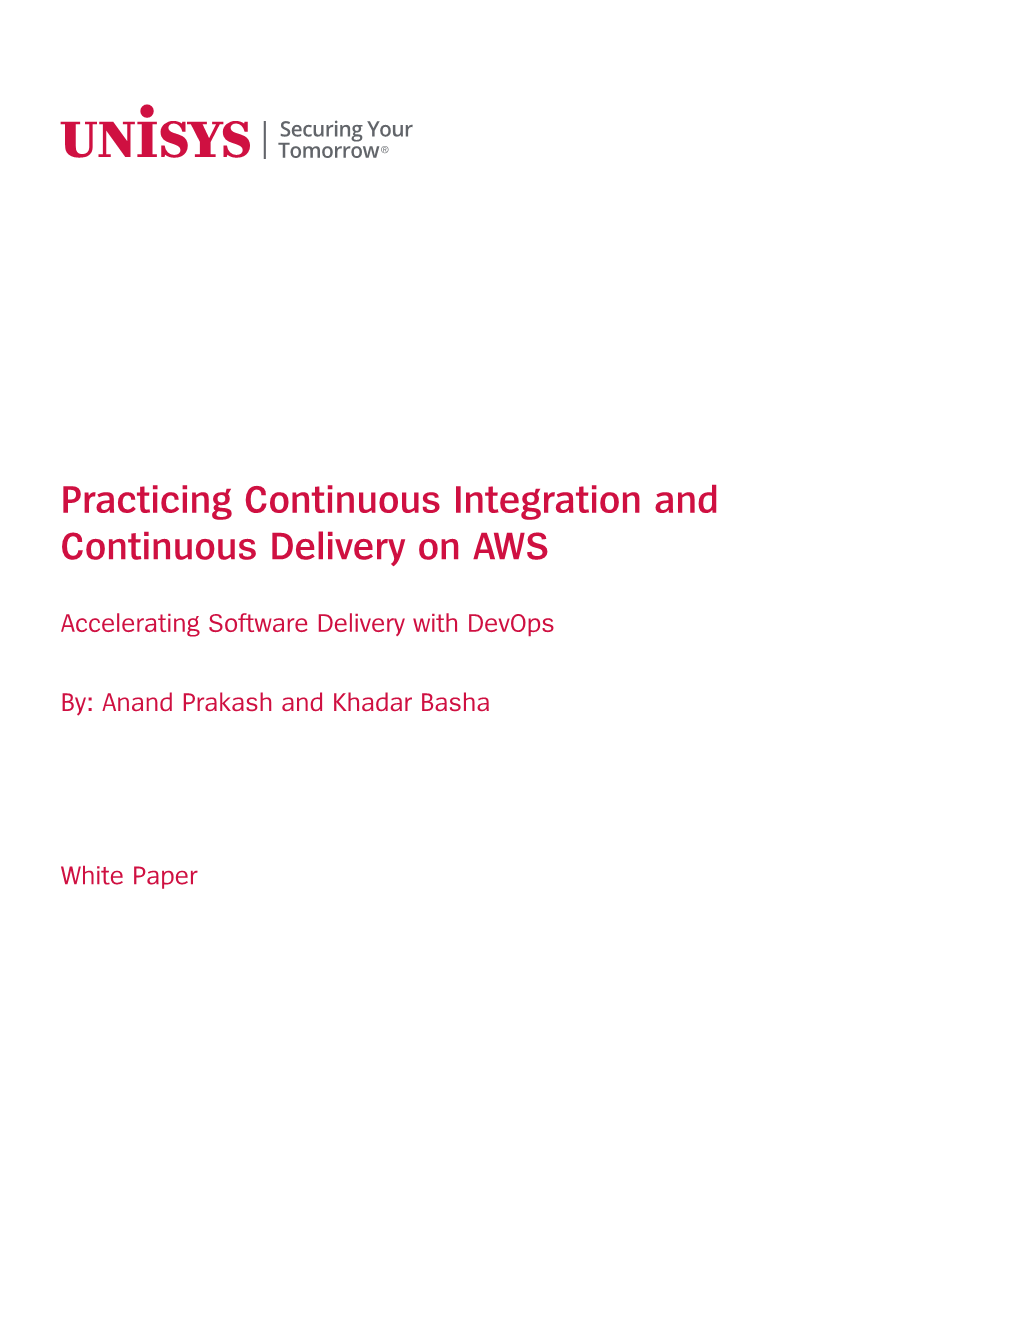 Whitepaper Practicing Continuous Integration and Continuous